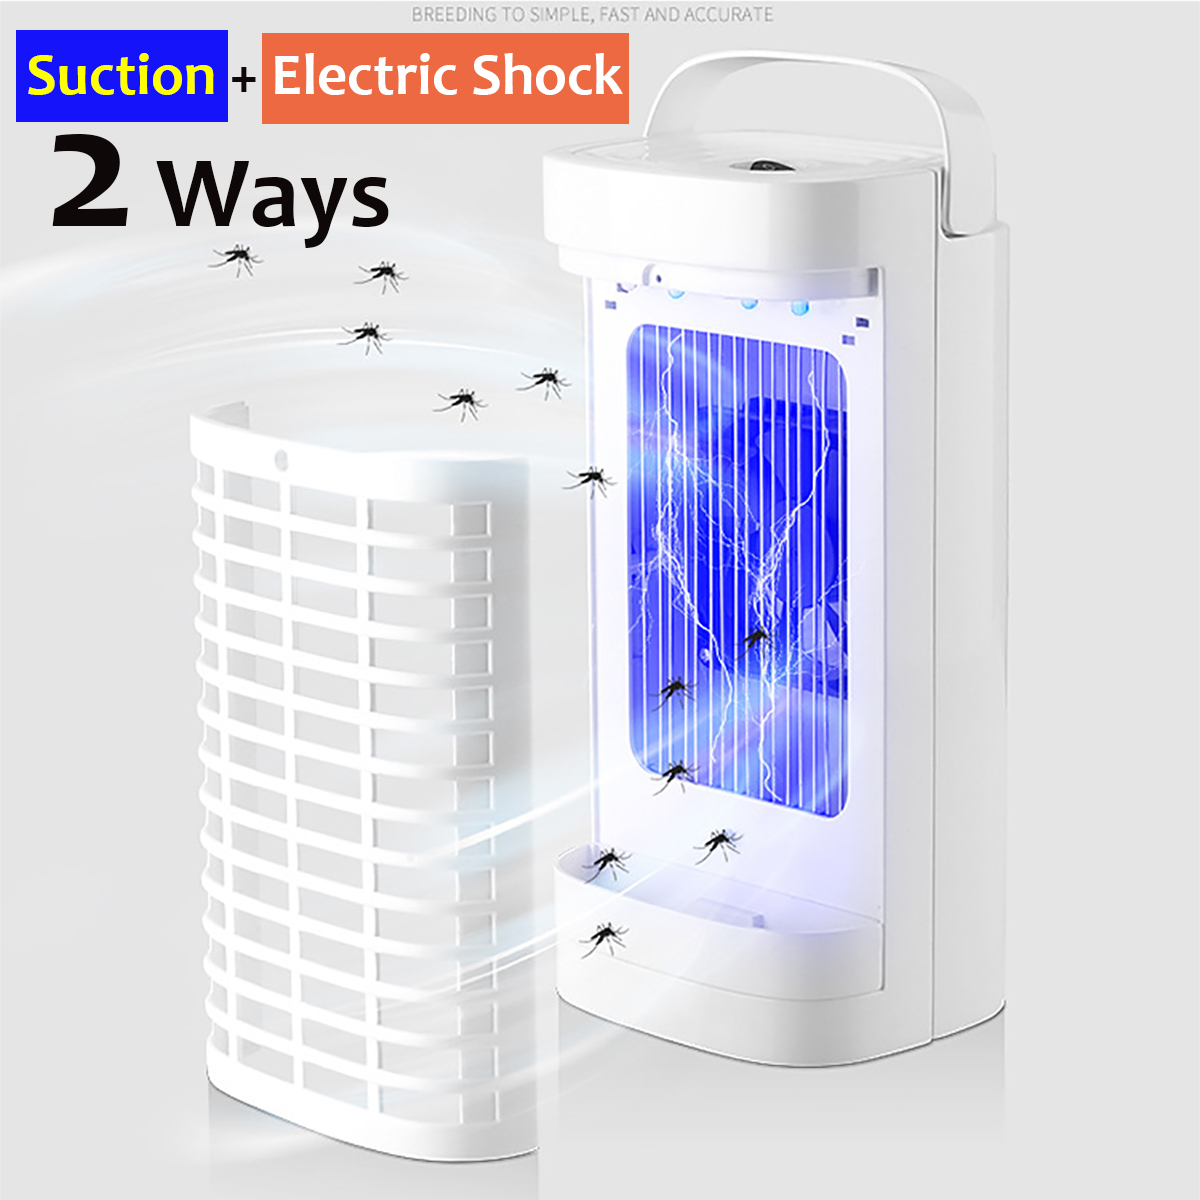 Electric-Shock--Suction-Mosquito-Repellent-Light-Mute-LED-Lamp-Insect-Killer-1678238-3